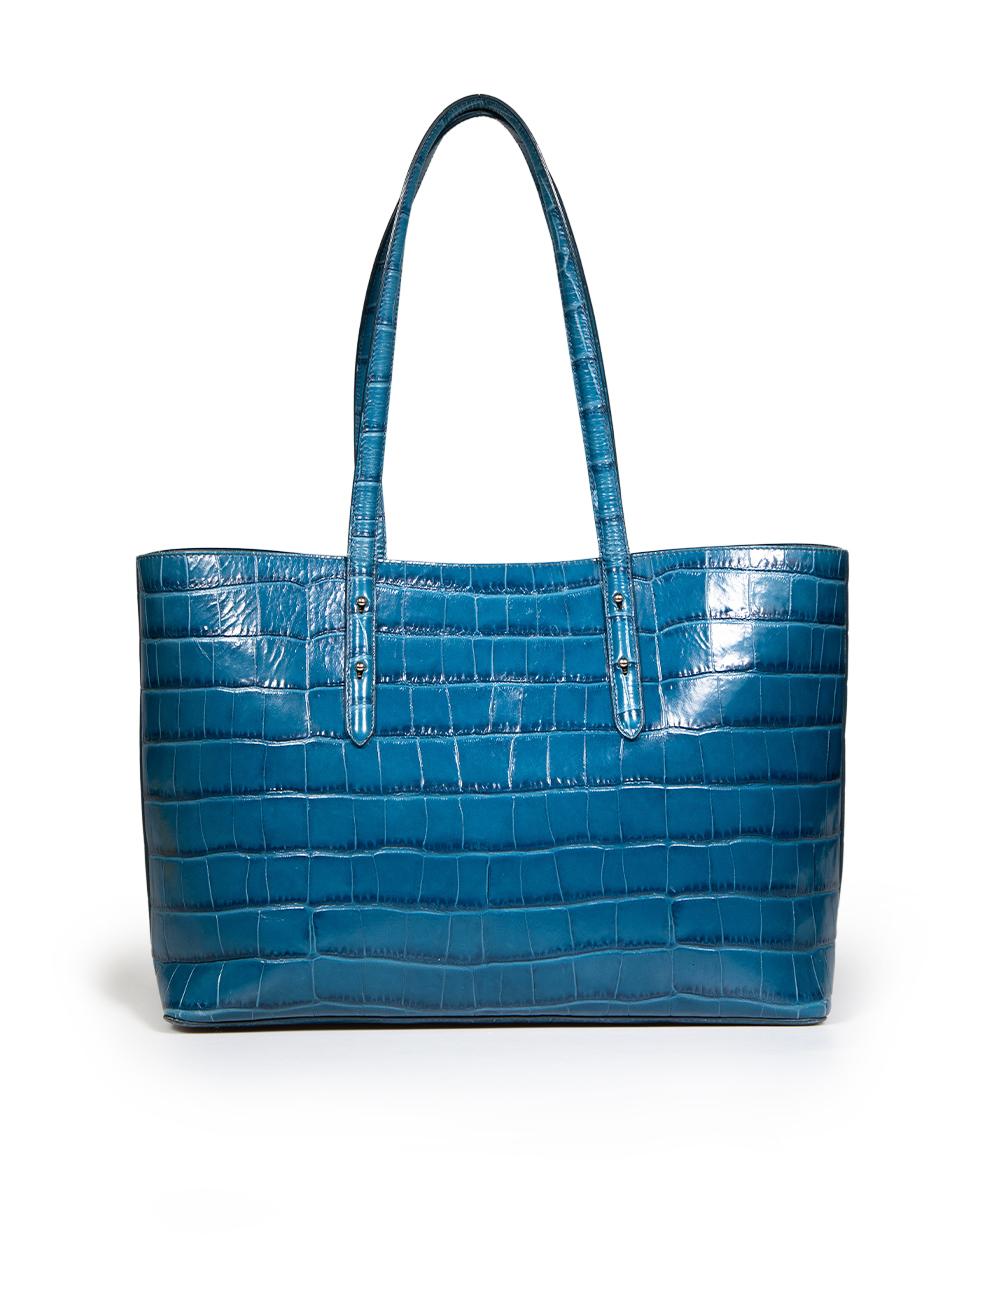 Women's Aspinal of London Teal Leather Croc Embossed Regent Tote For Sale